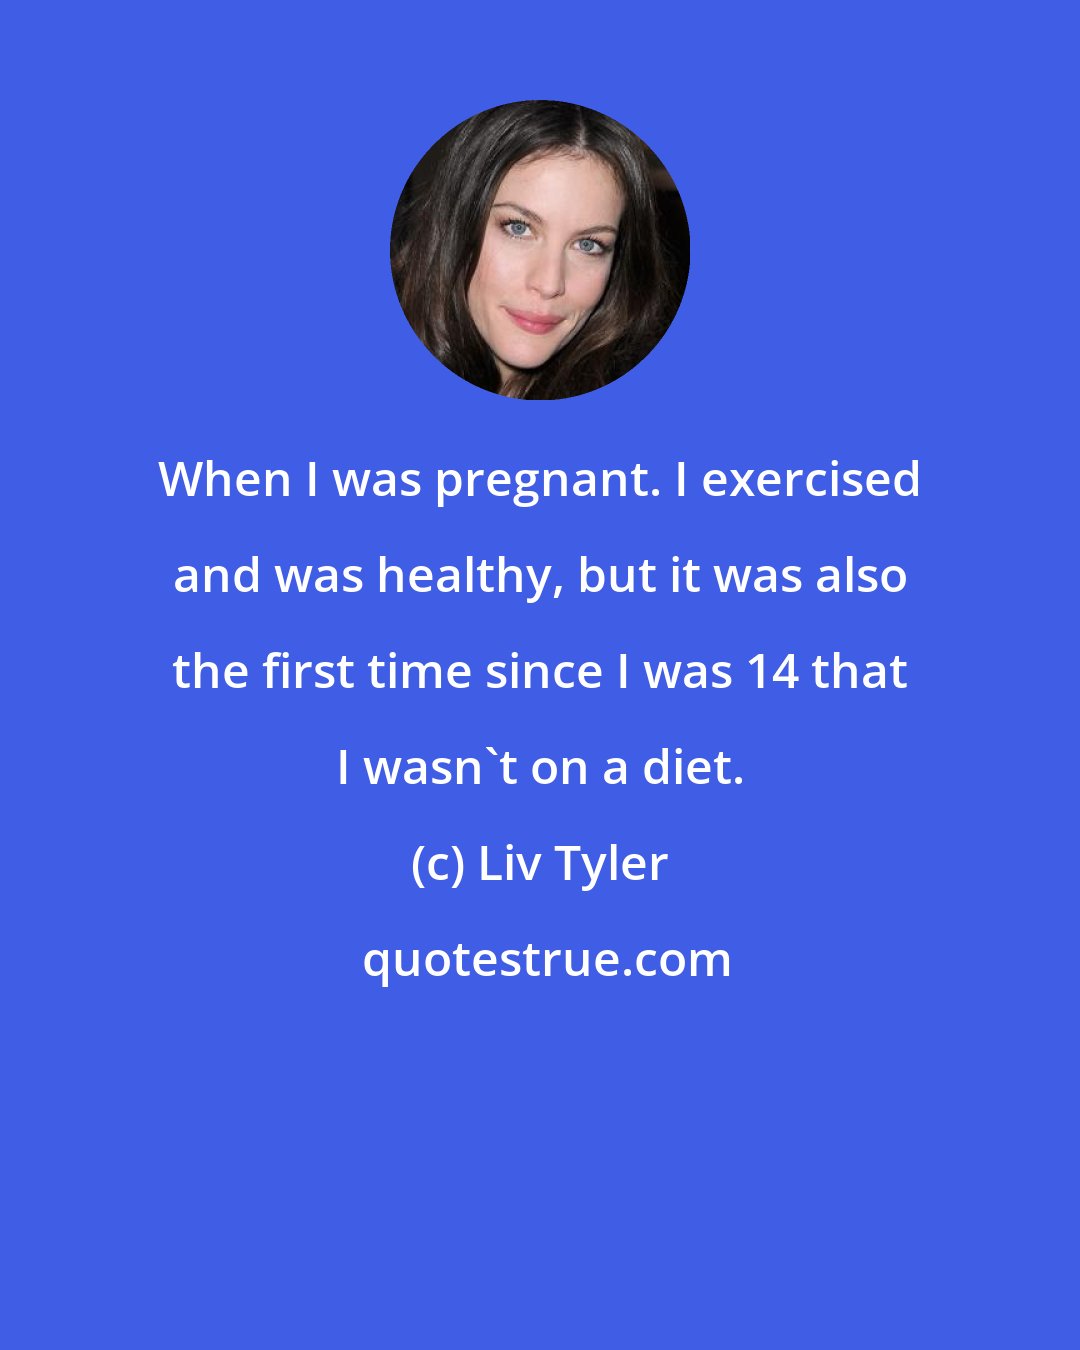 Liv Tyler: When I was pregnant. I exercised and was healthy, but it was also the first time since I was 14 that I wasn't on a diet.